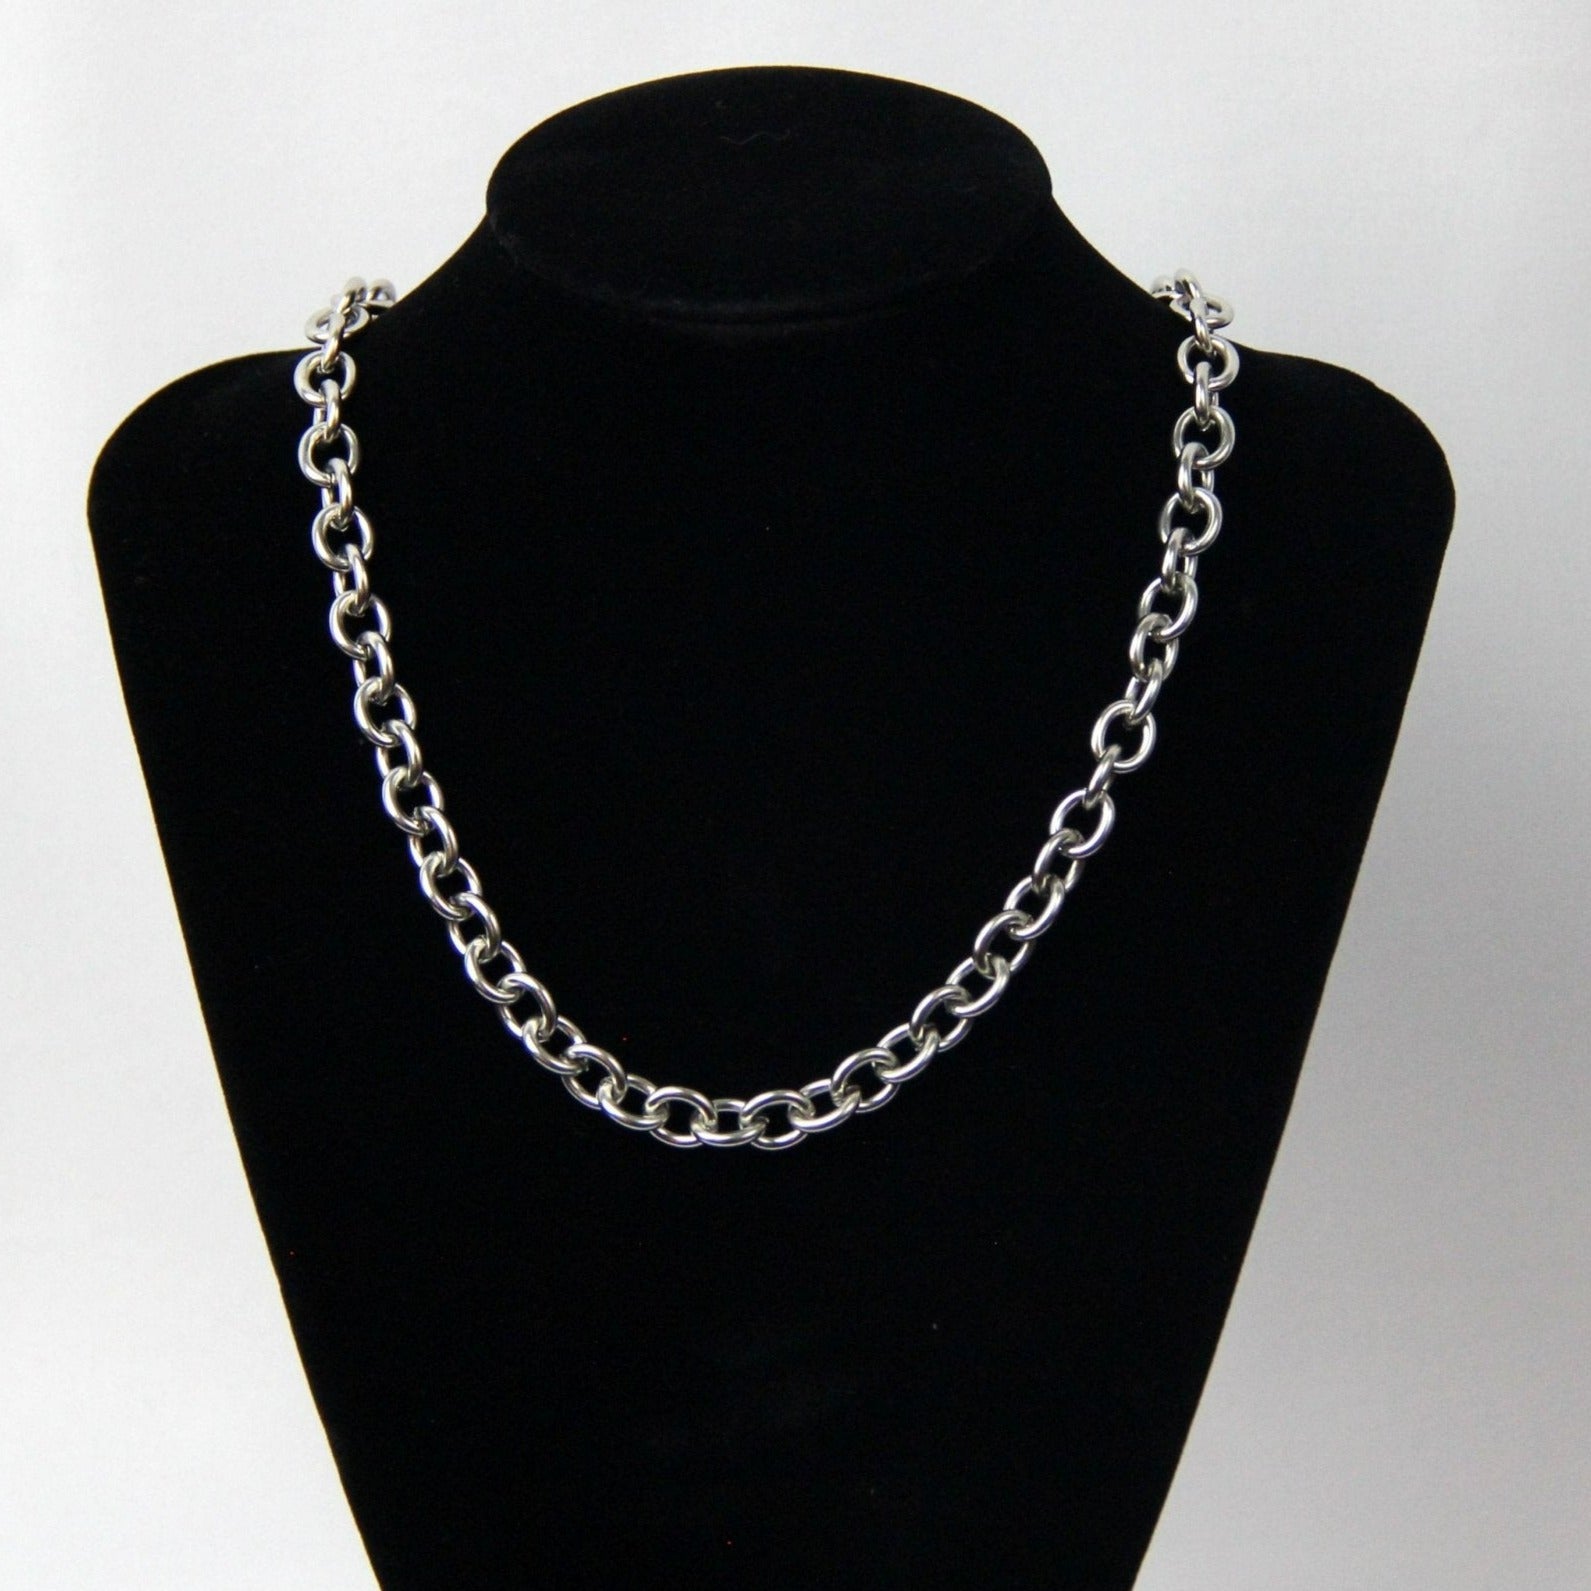 Chunky Silver 8mm Rolo Chain Necklace For Men or Women